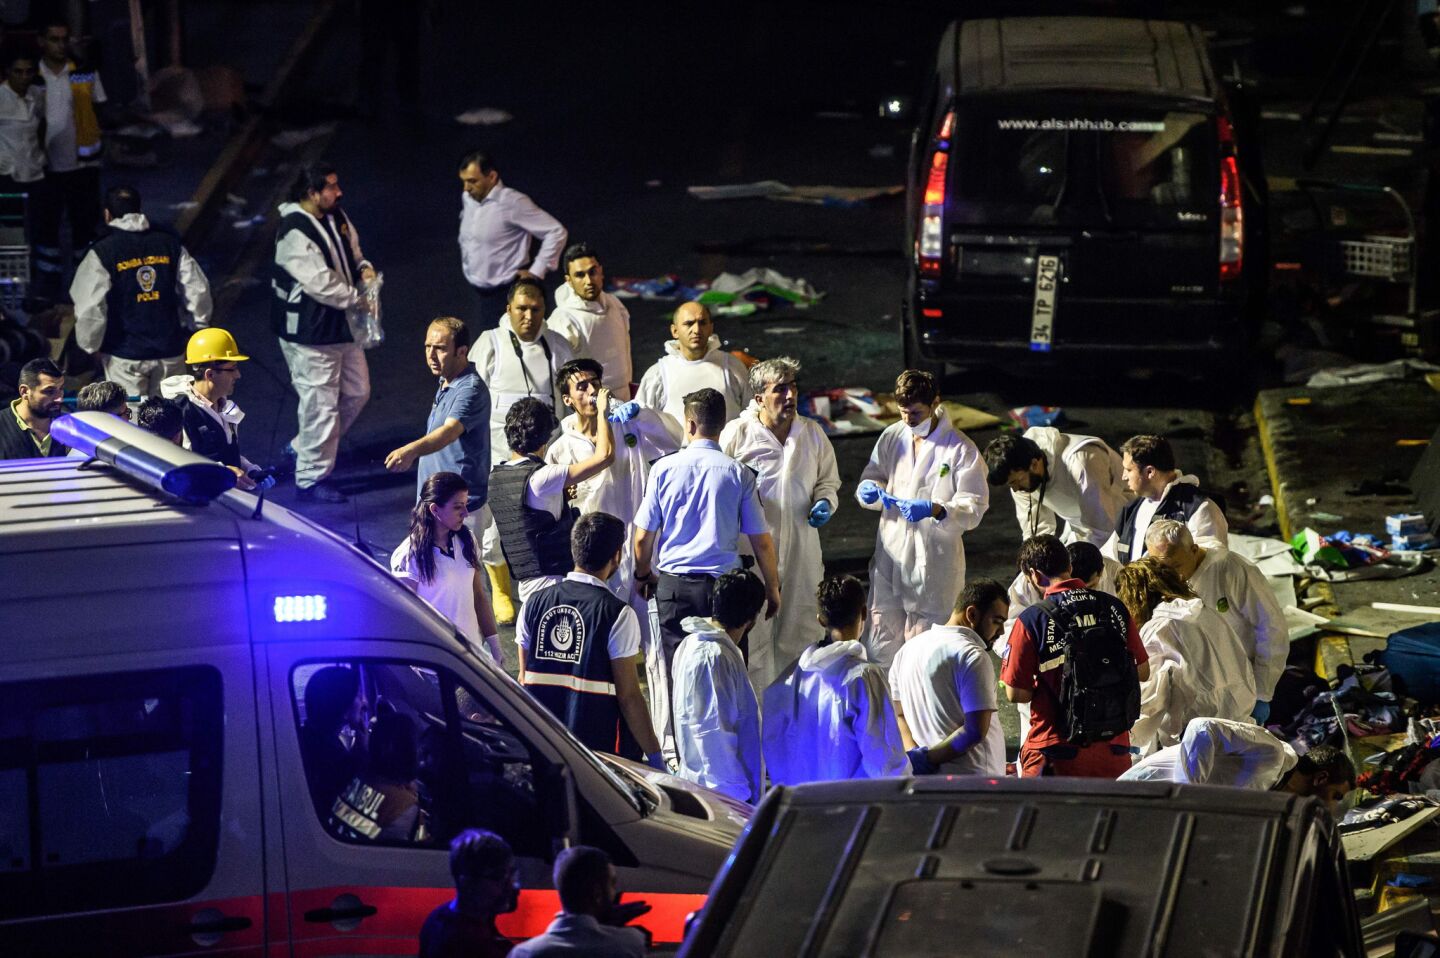 Forensic police work the explosion site at Ataturk airport.